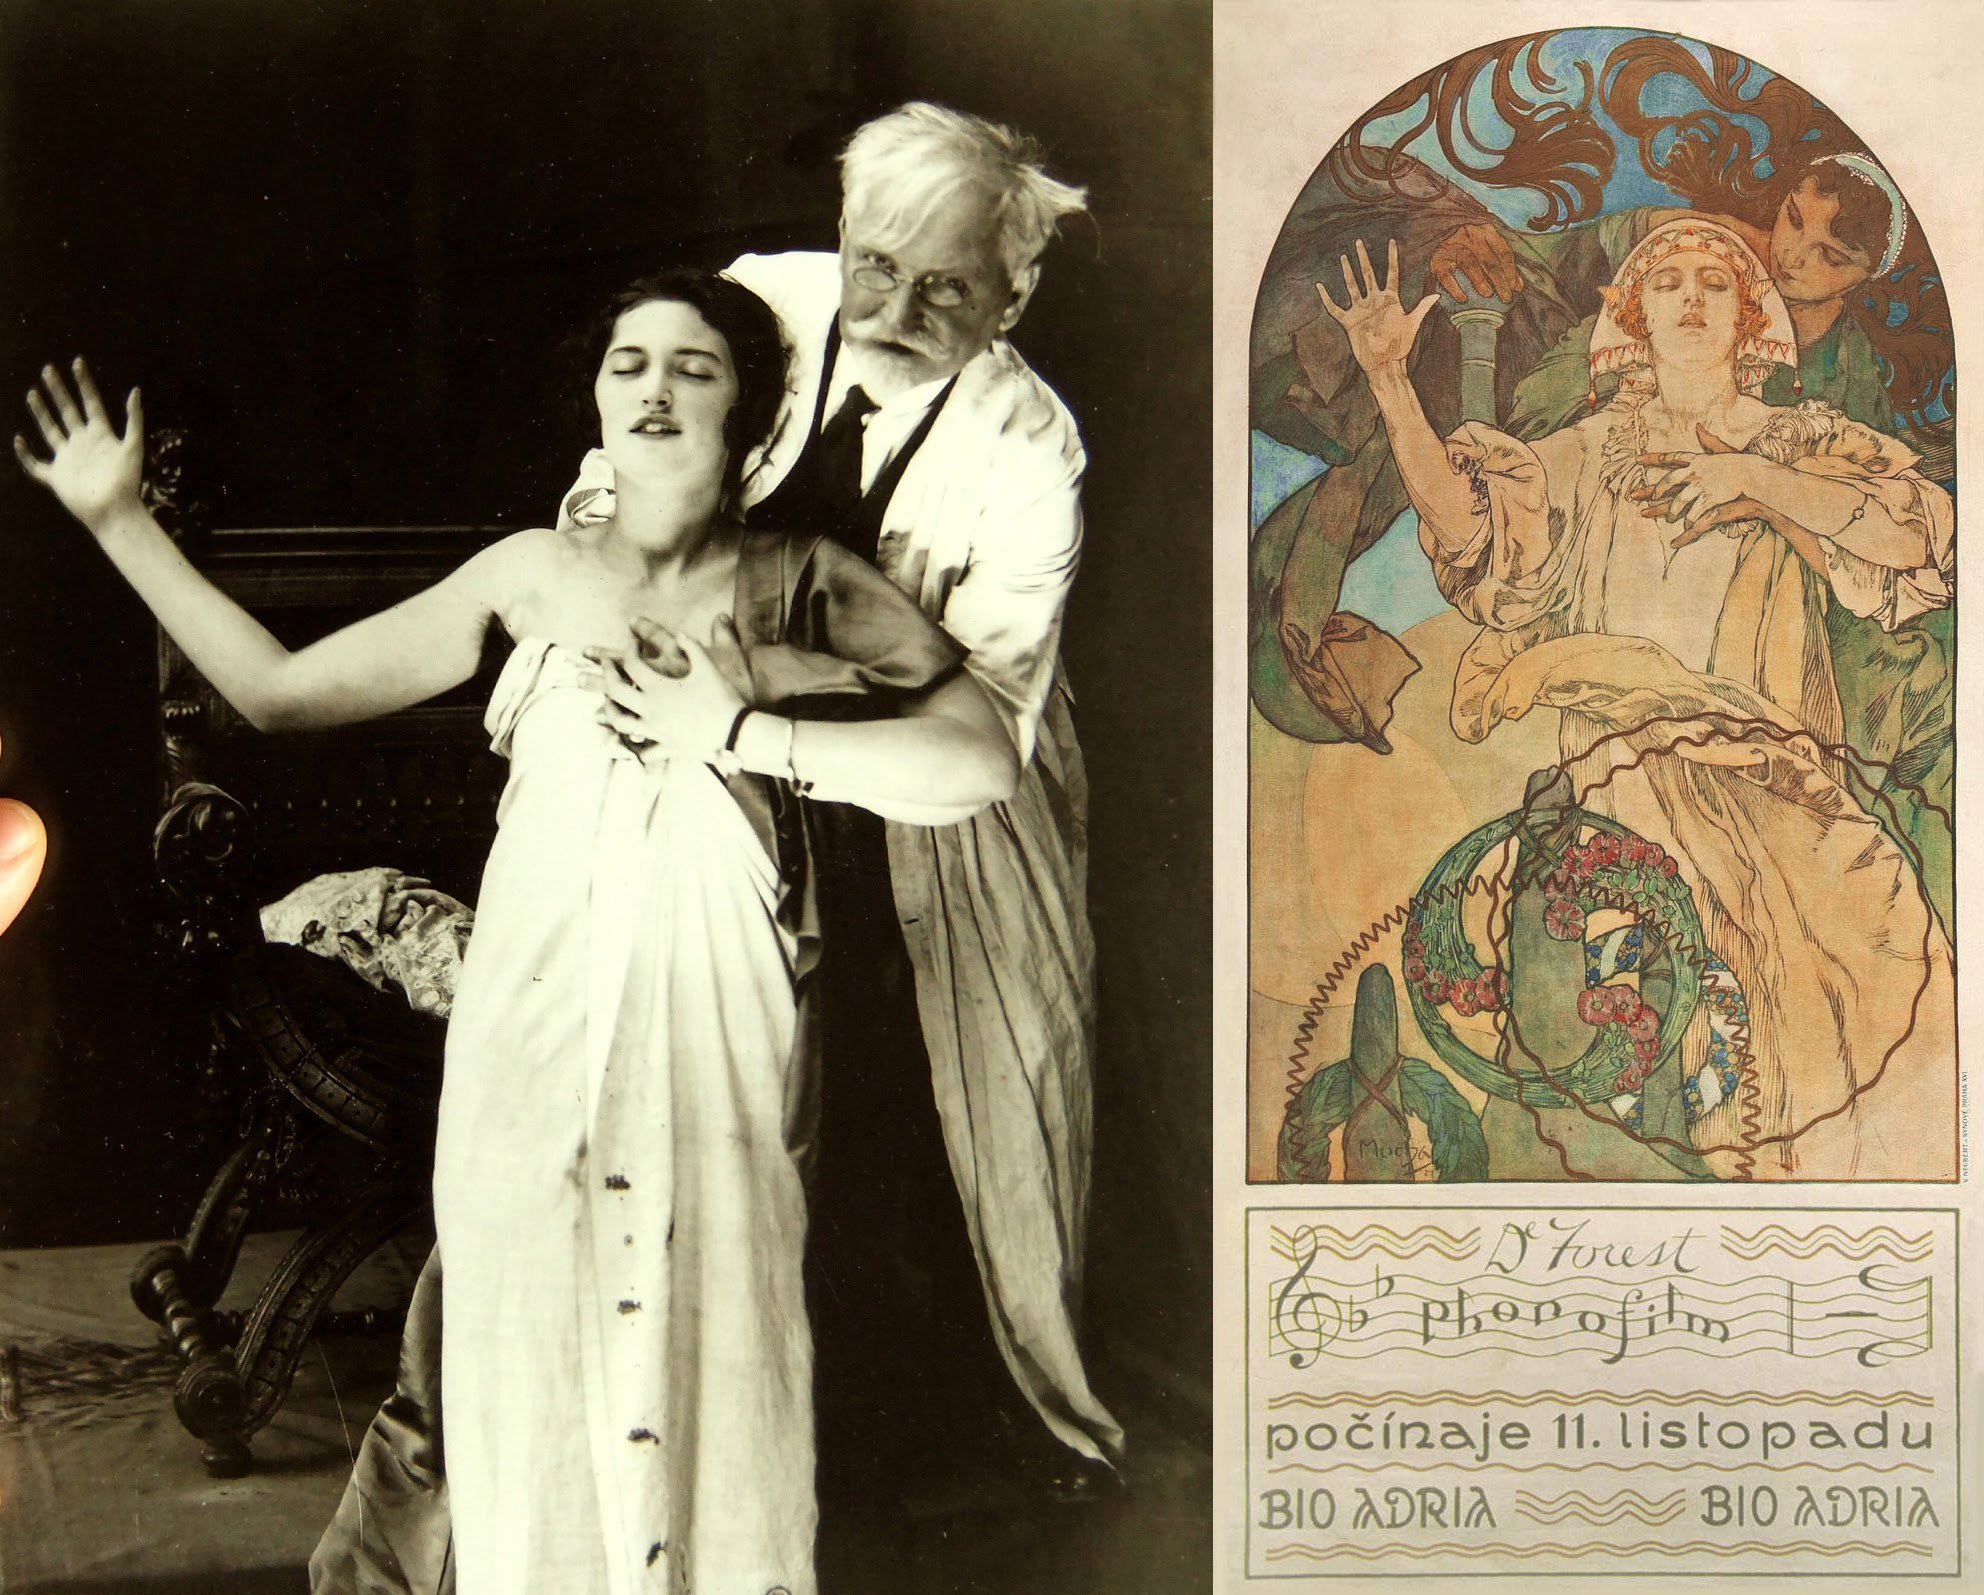 DeForest Phonofilm by Alphonse Mucha - 1927 Colección privada